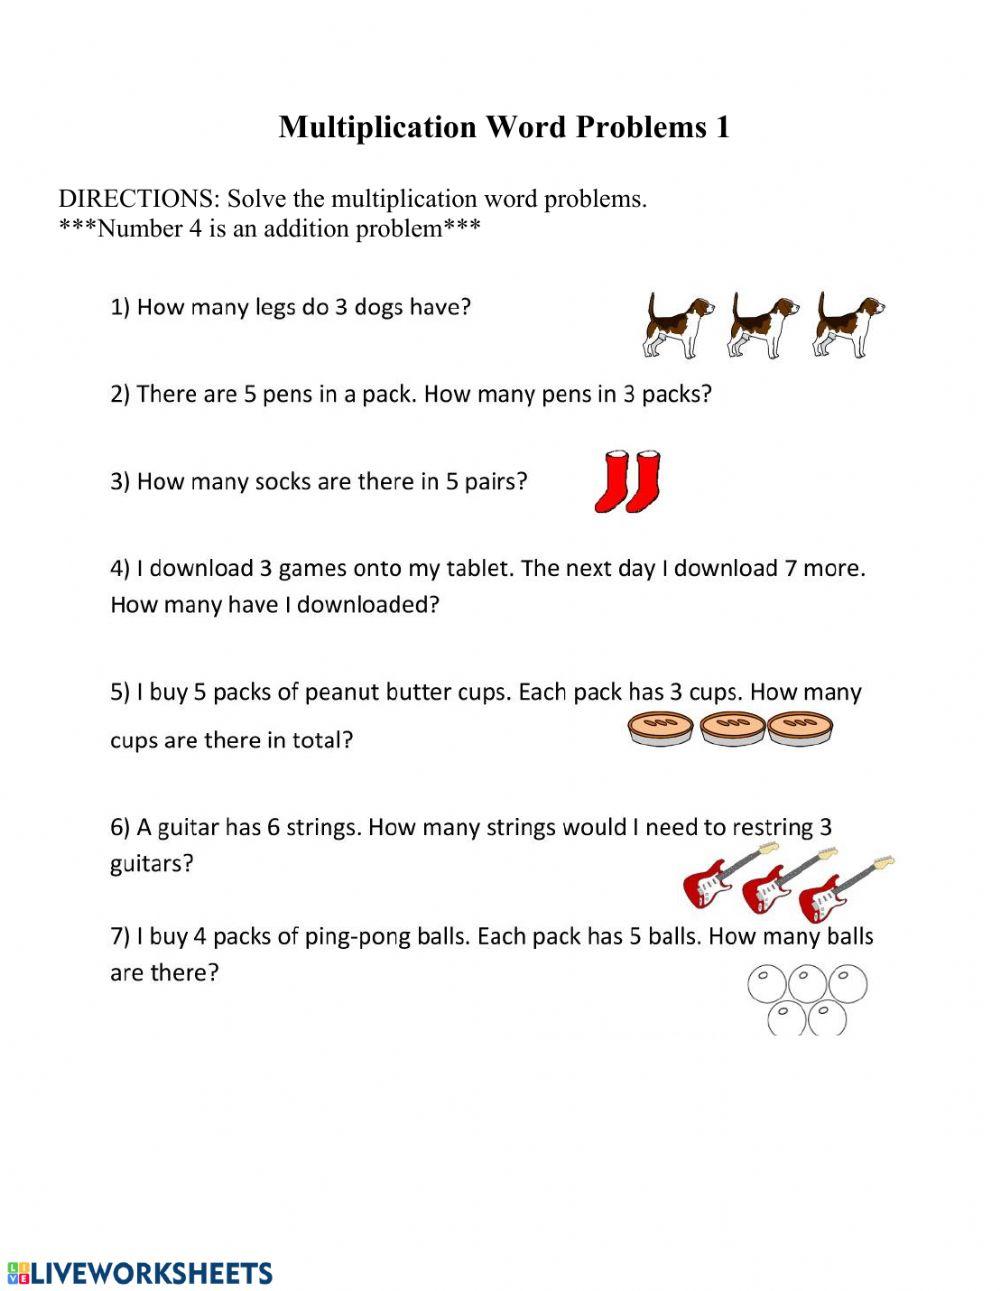 Multiplication Word Problems 1